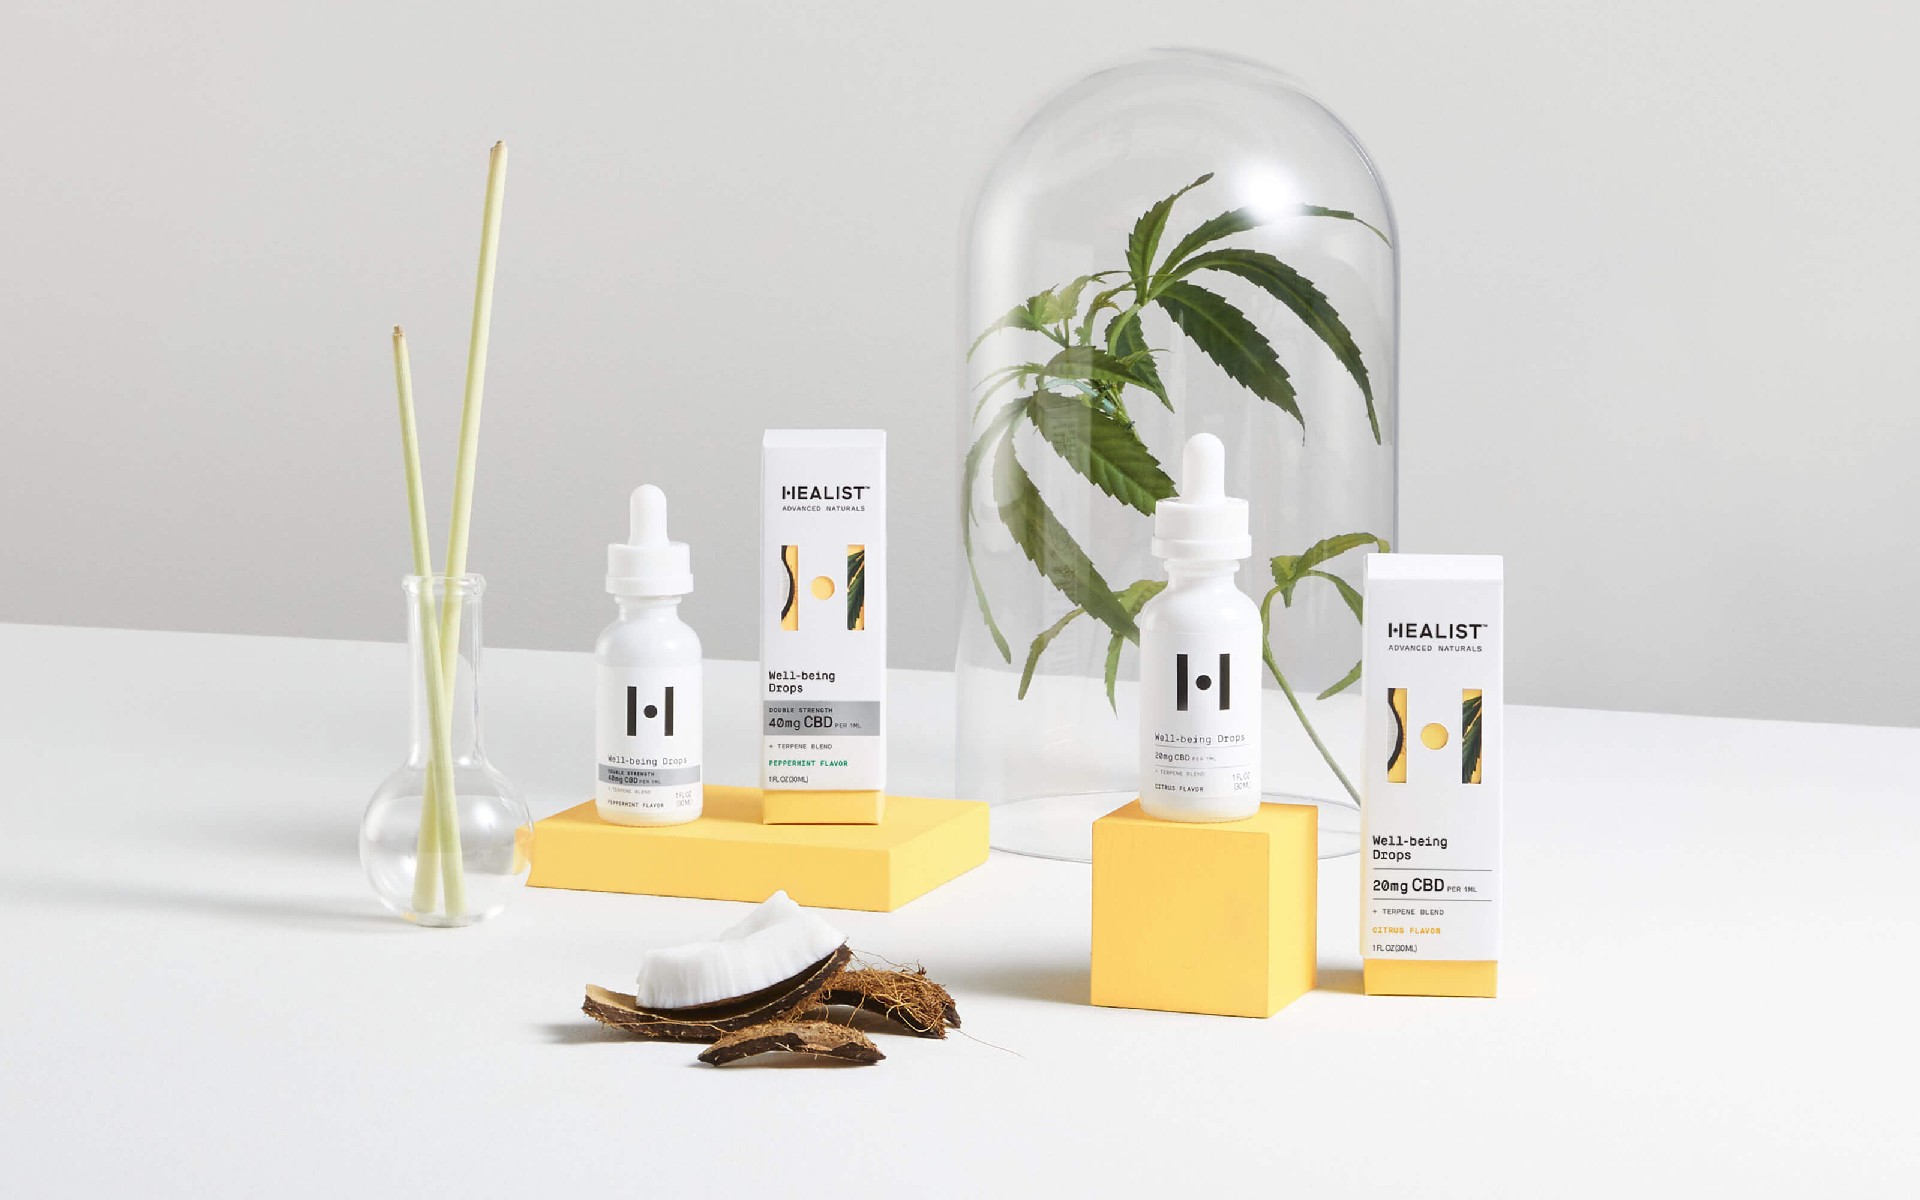 Healist cannabidiol CBD herbal health products pharmaceutical packaging design, balance of natural plants and modern science